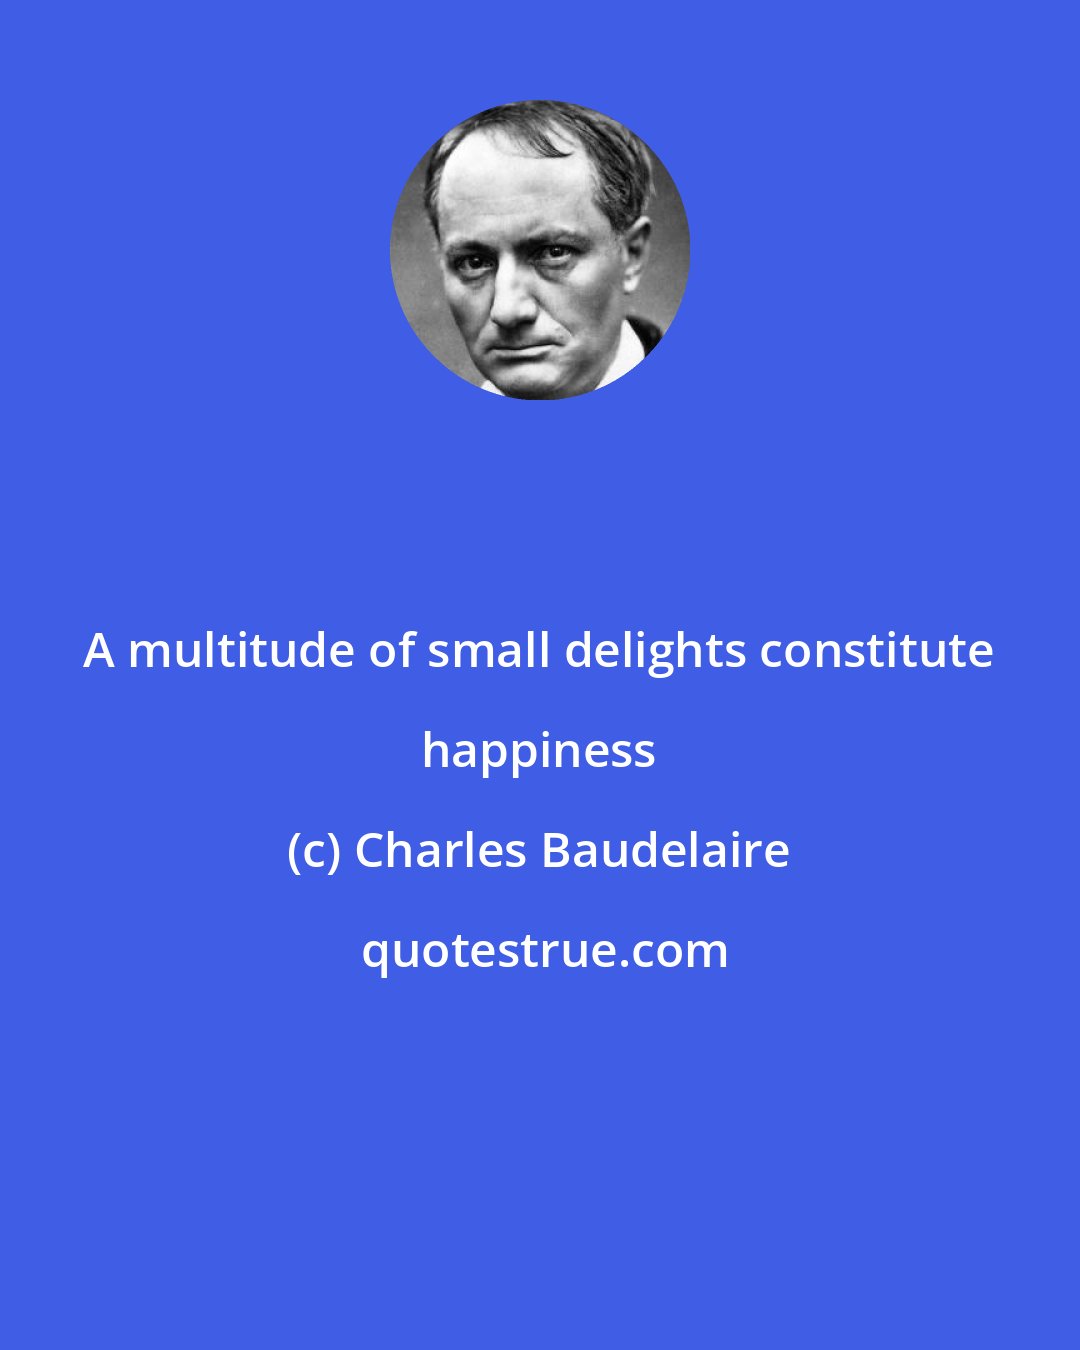 Charles Baudelaire: A multitude of small delights constitute happiness